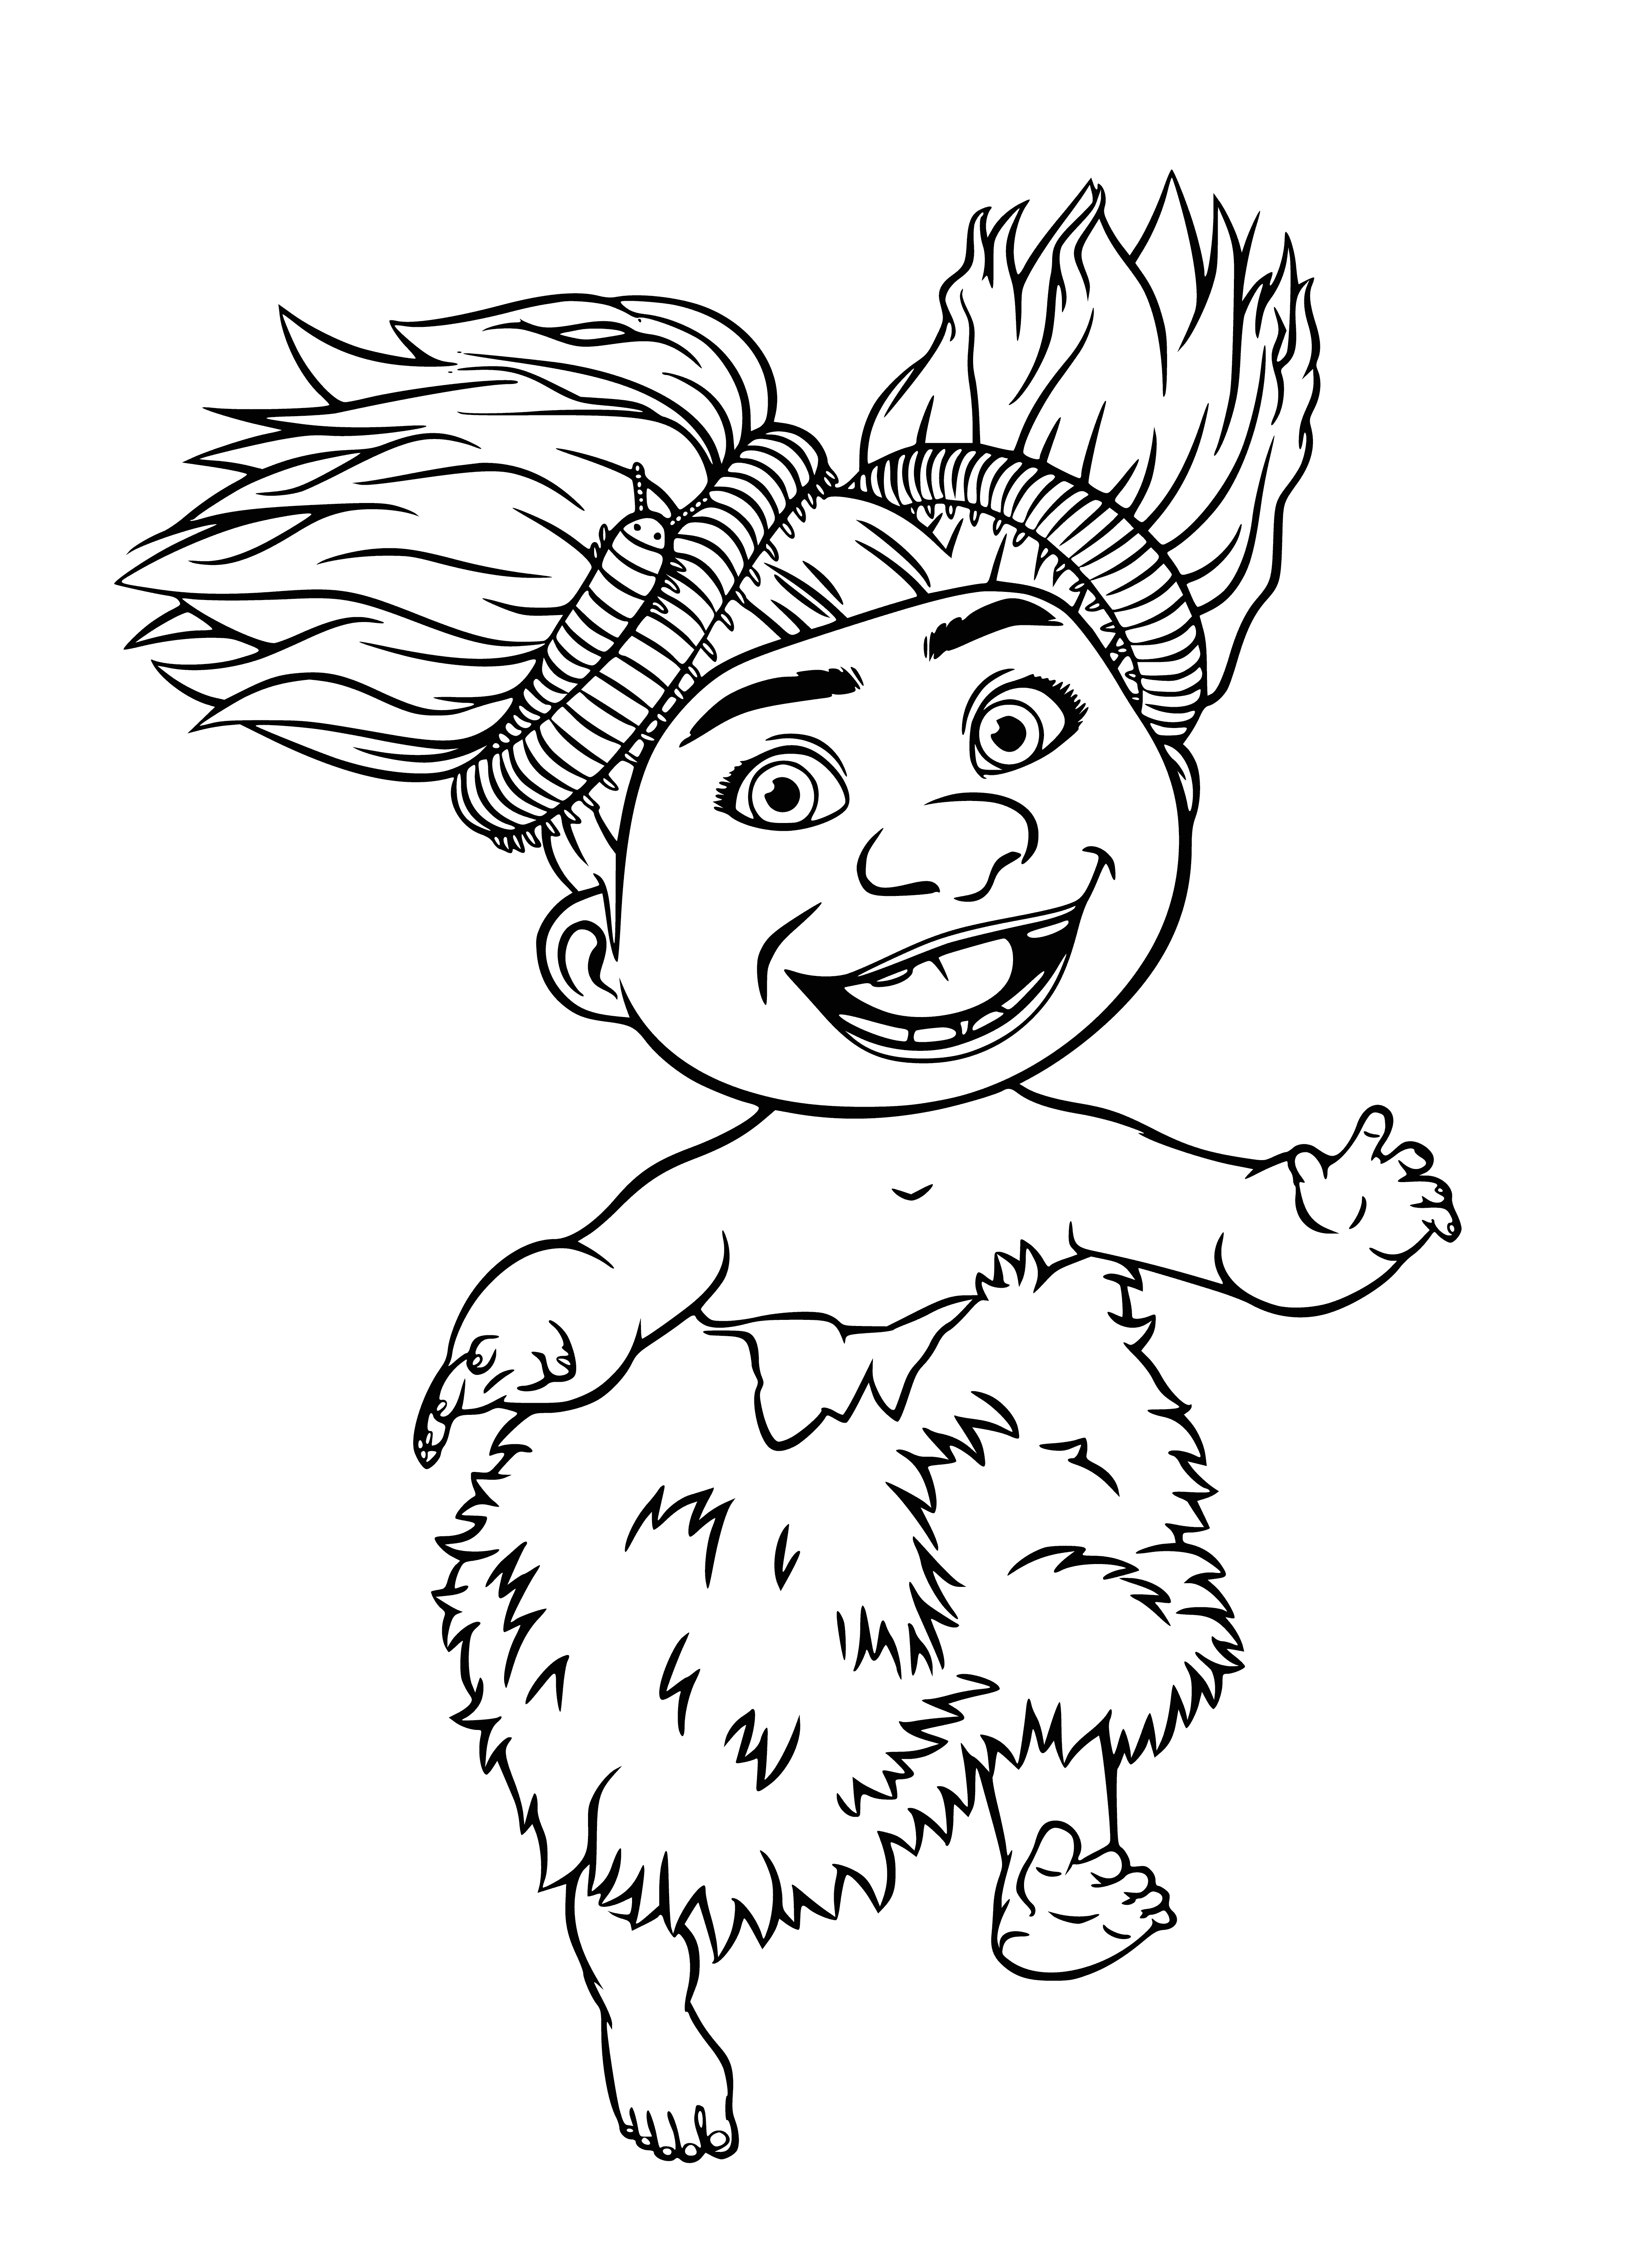 coloring page: A sandy-colored lizard with long tail, four legs, big black eyes, open mouth, long thin tongue, and sharp teeth.